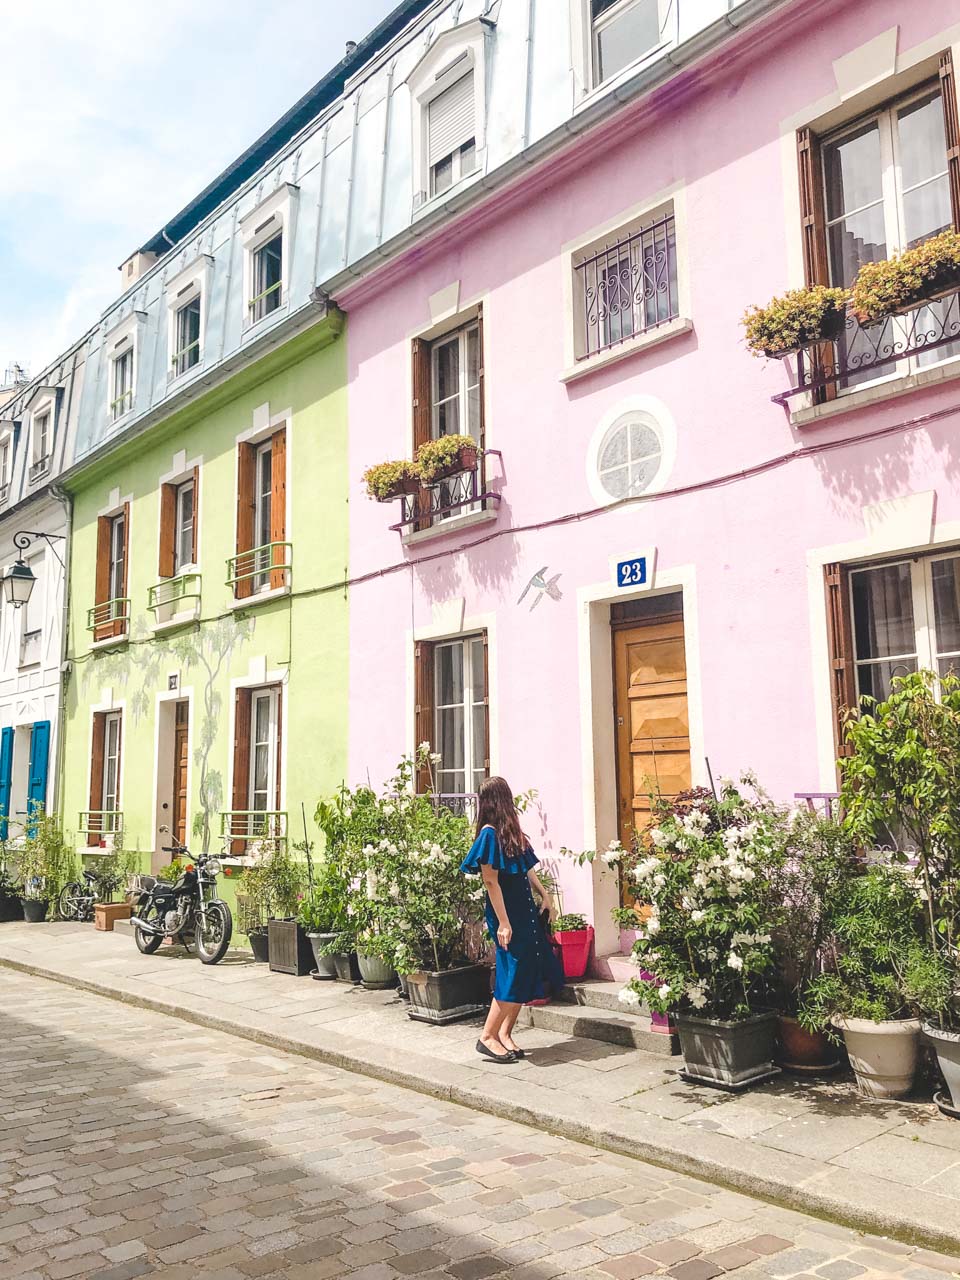 Young dark-haired woman in a blue off-the-shoulder dress looking up at a pink house on Rue Crémieux